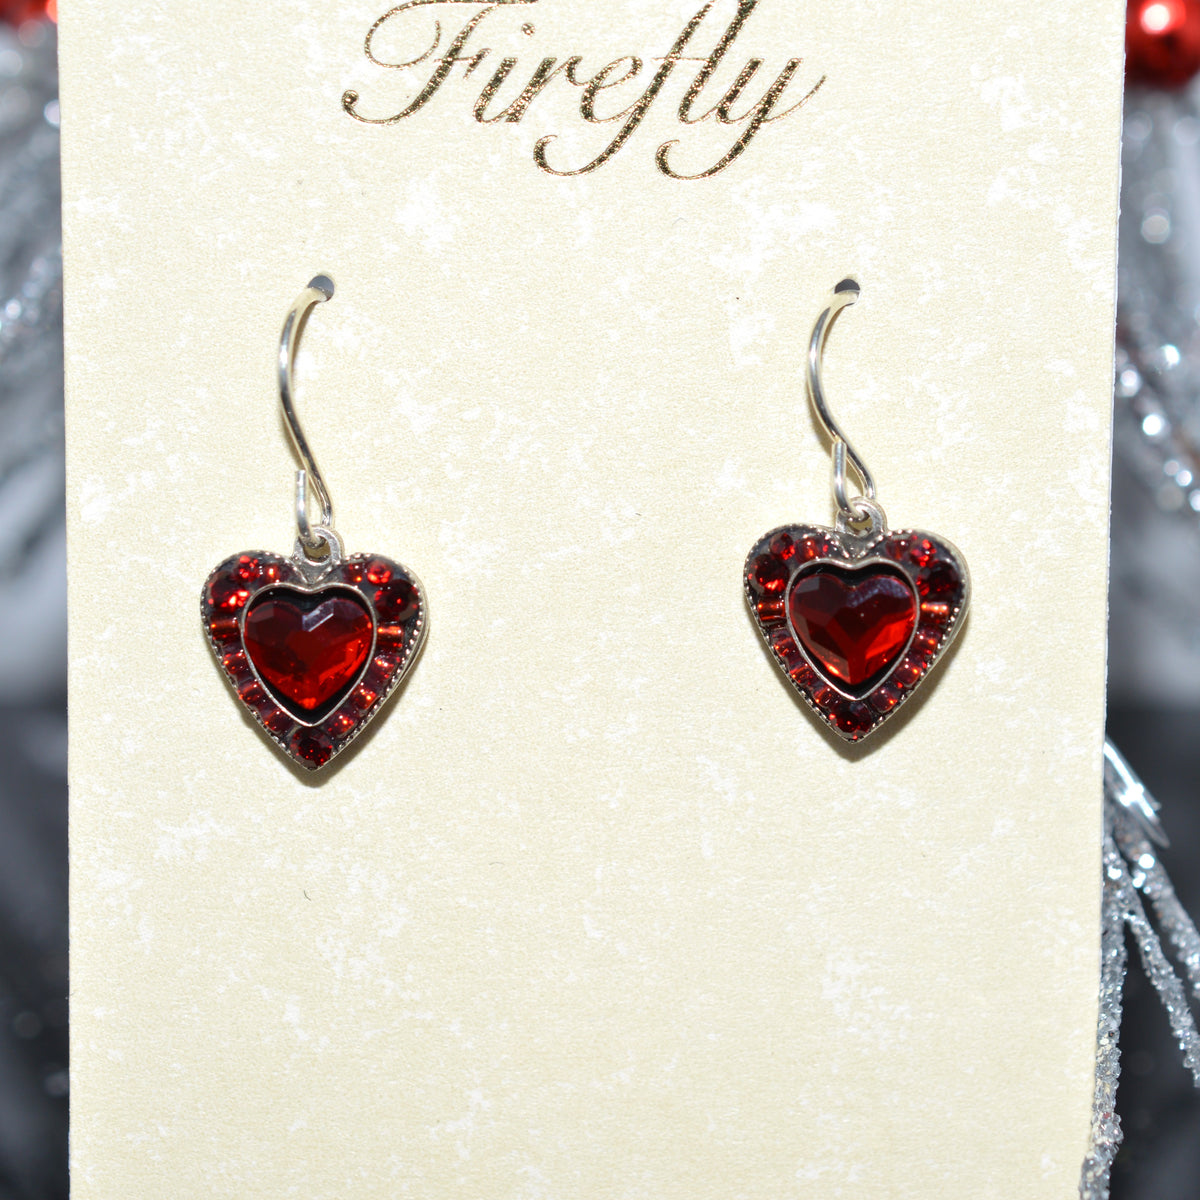 Antique Silver Plated Red Crystal Heart Earrings by Firefly